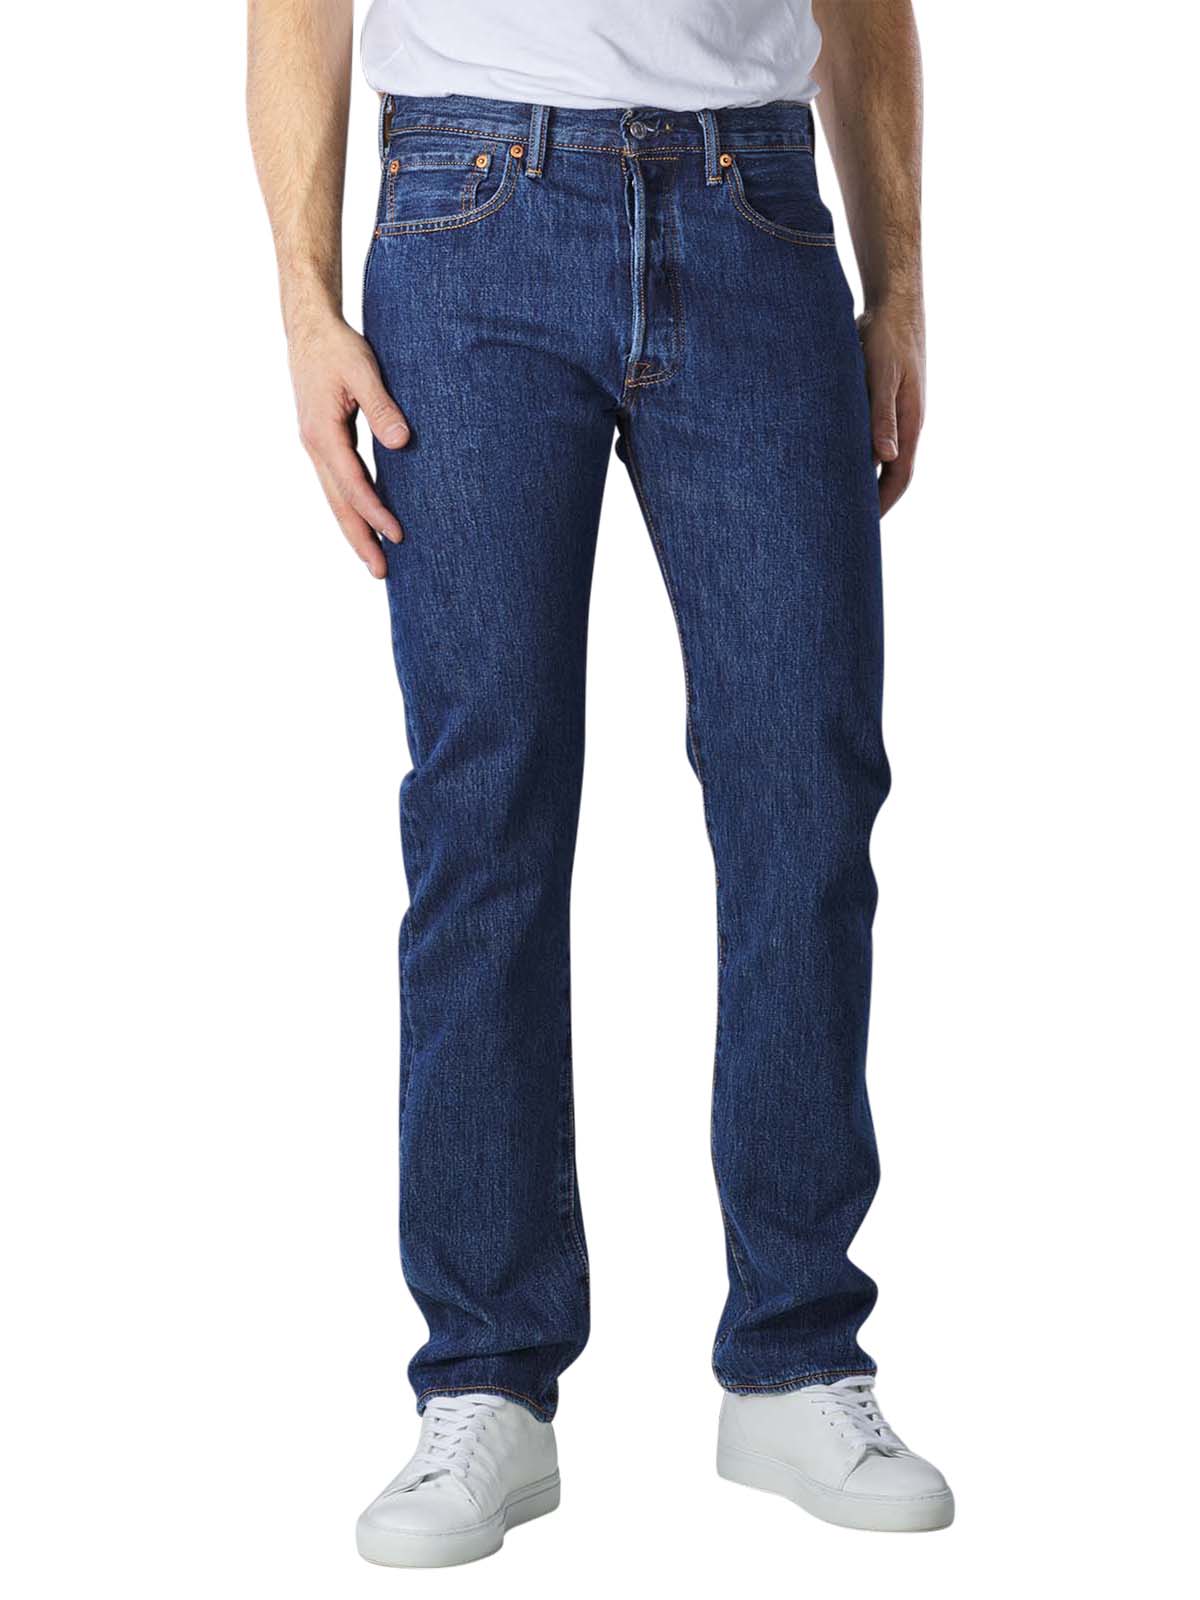 Levi's 501 Jeans dark stonewash Levi's Men's Jeans | Free Shipping on   - SIMPLY LOOK GOOD